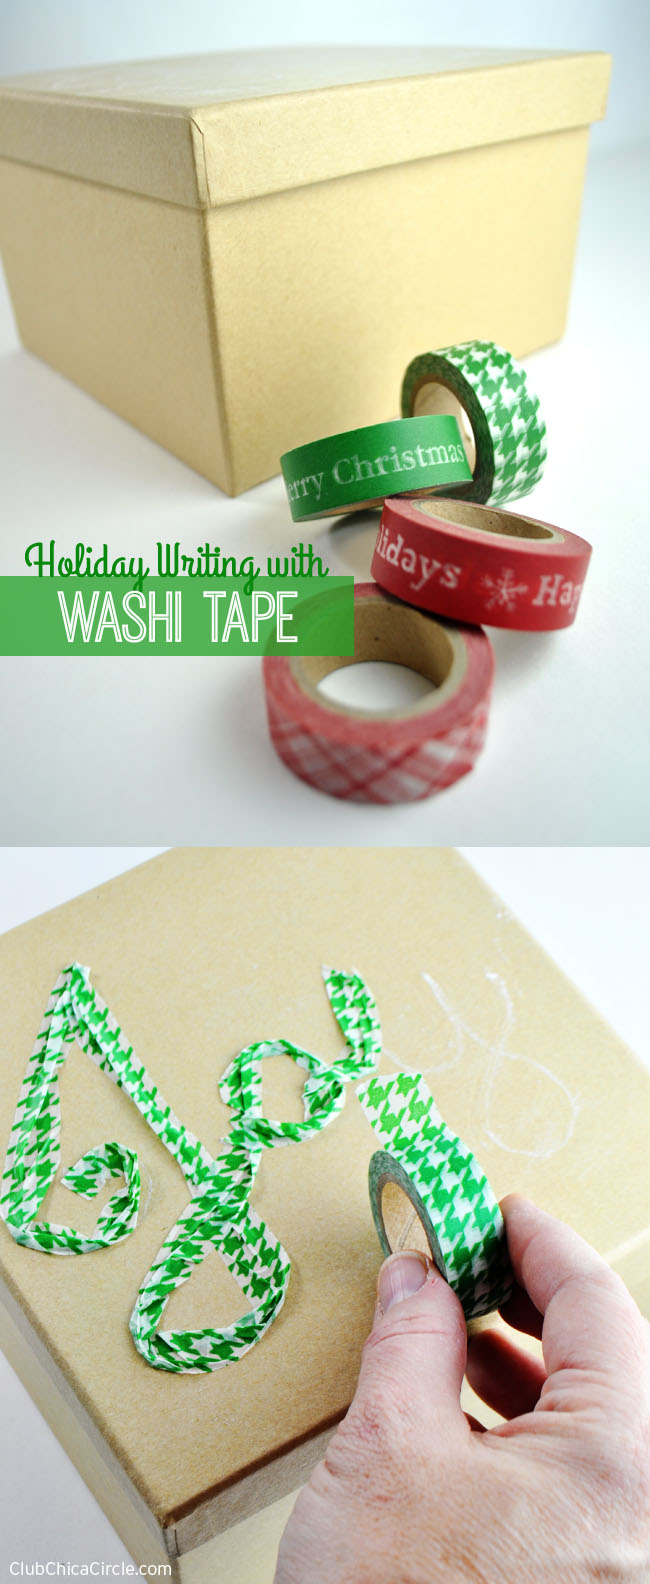 How to decorate a plain holiday package with washi tape